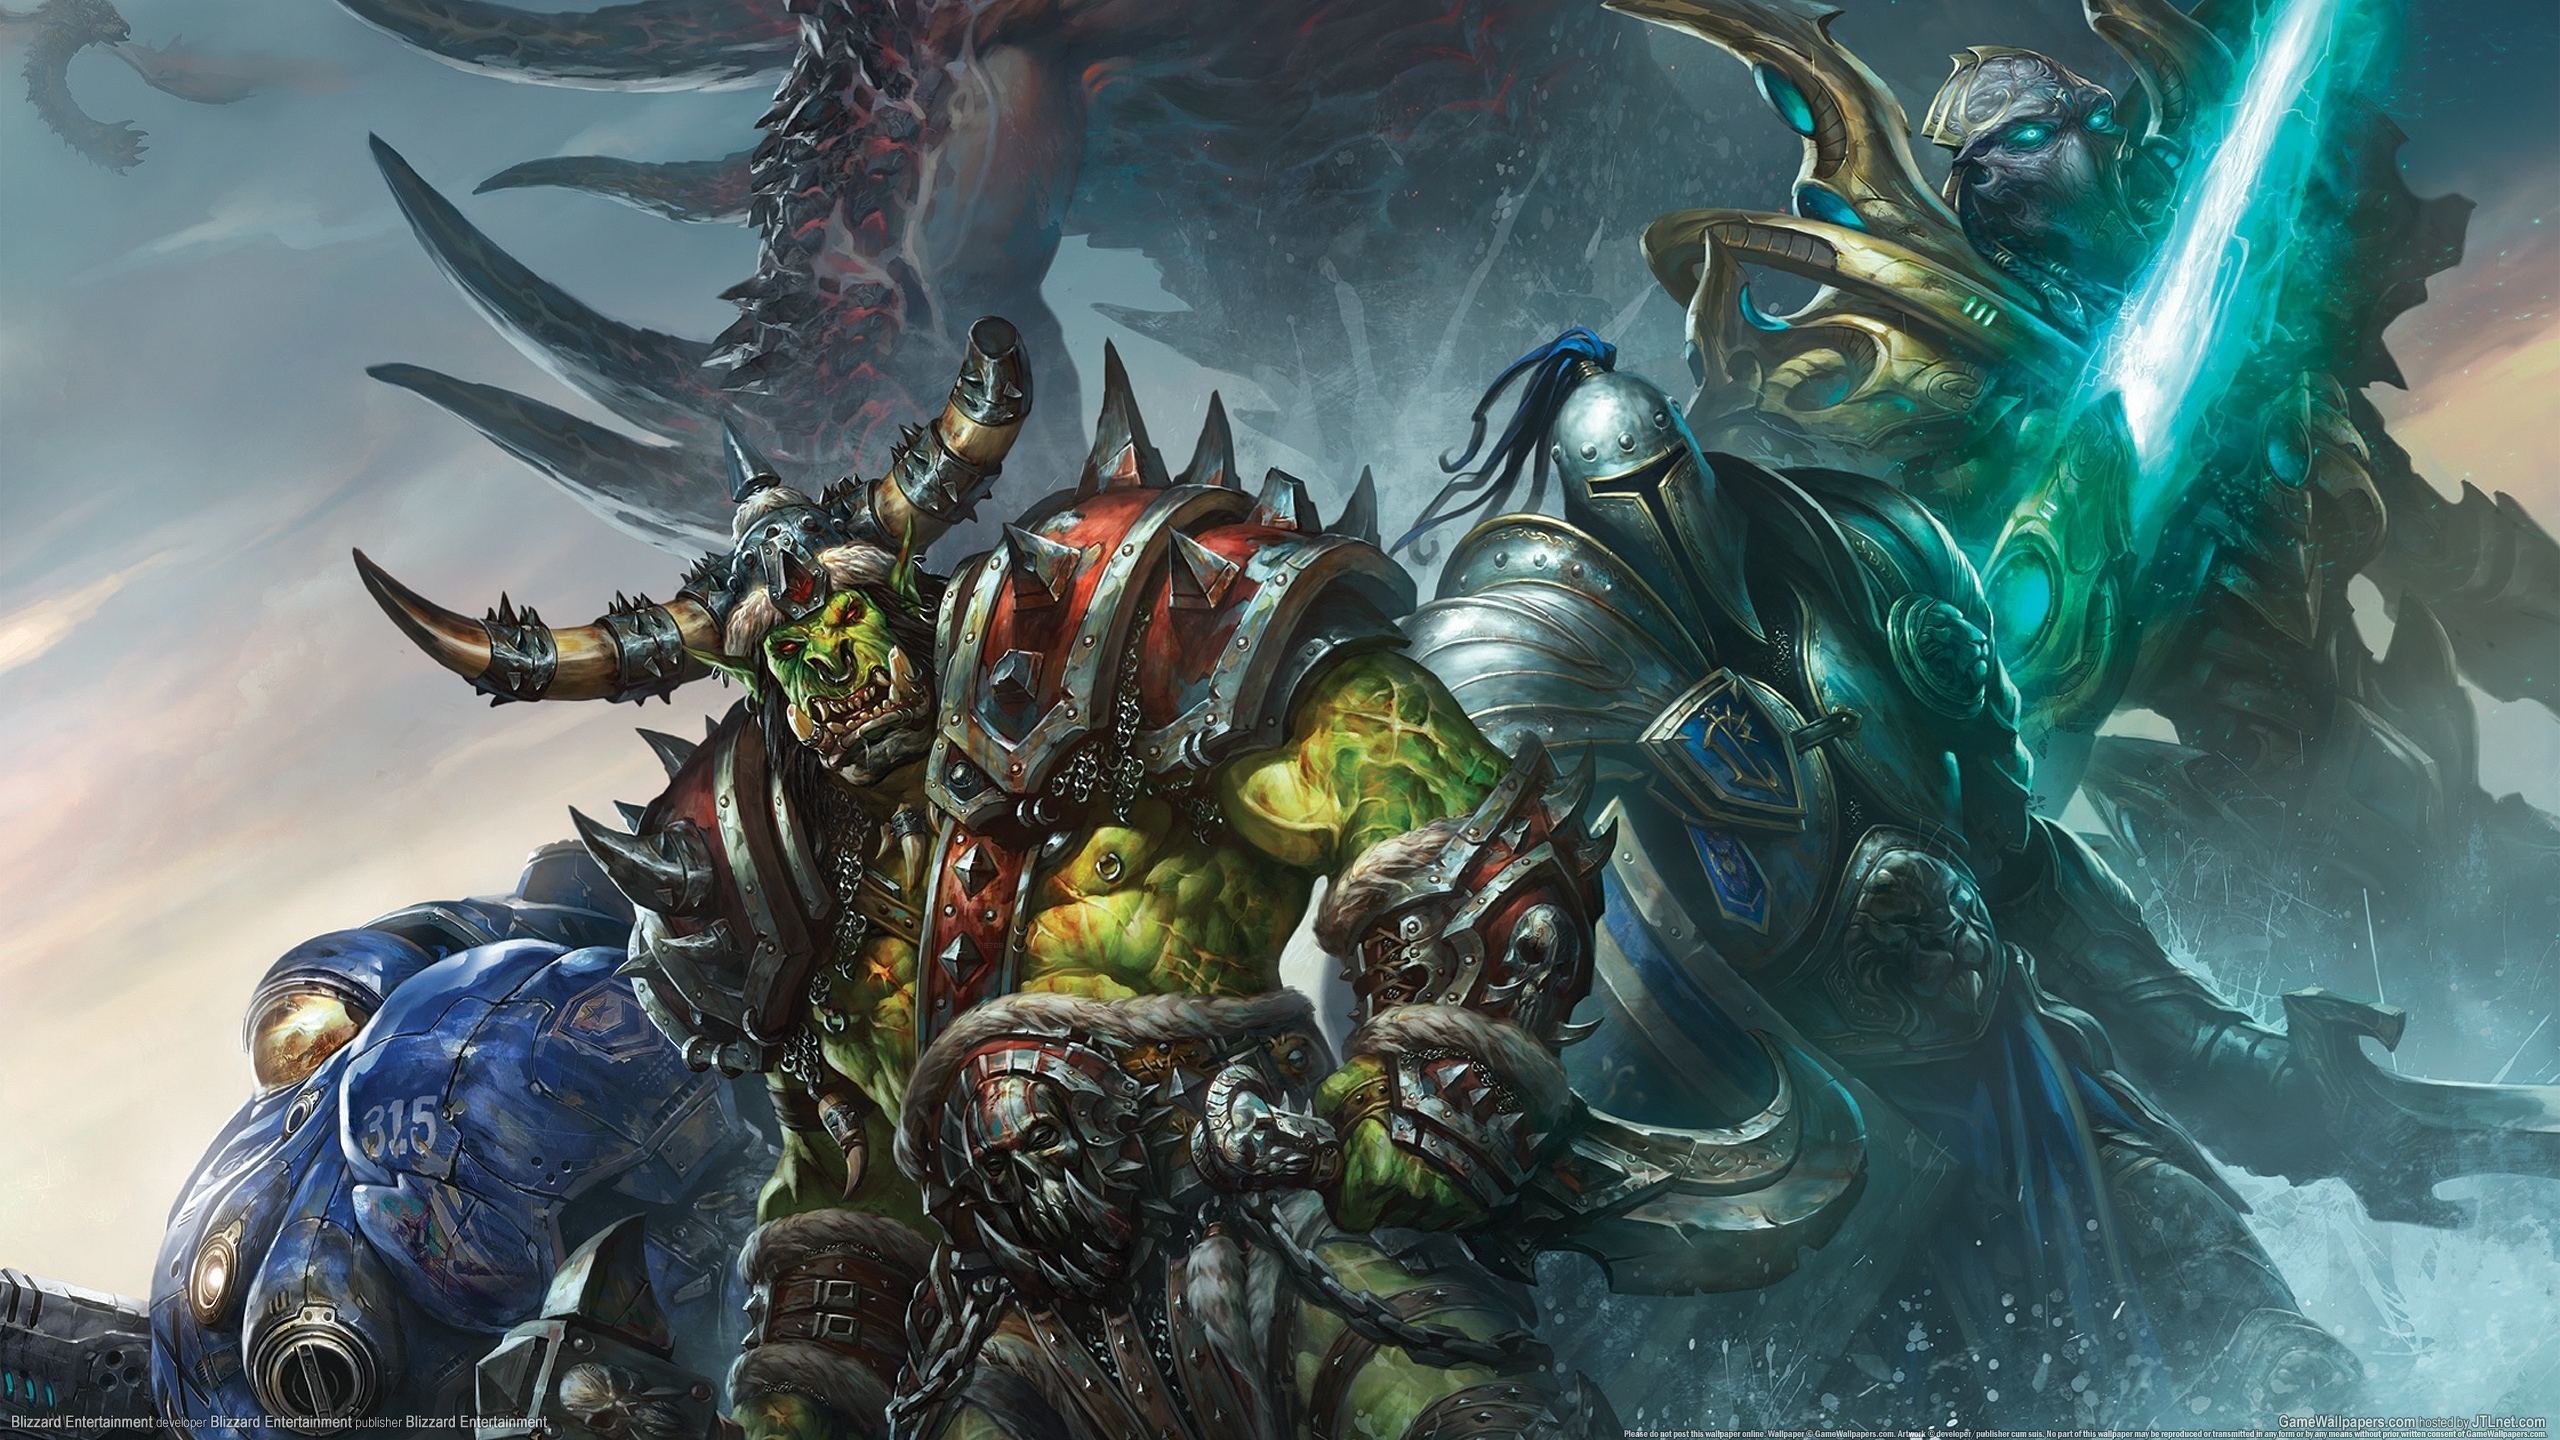 Of Warcraft Wow Orc Warrior Armor Horns Games Fantasy Wallpaper